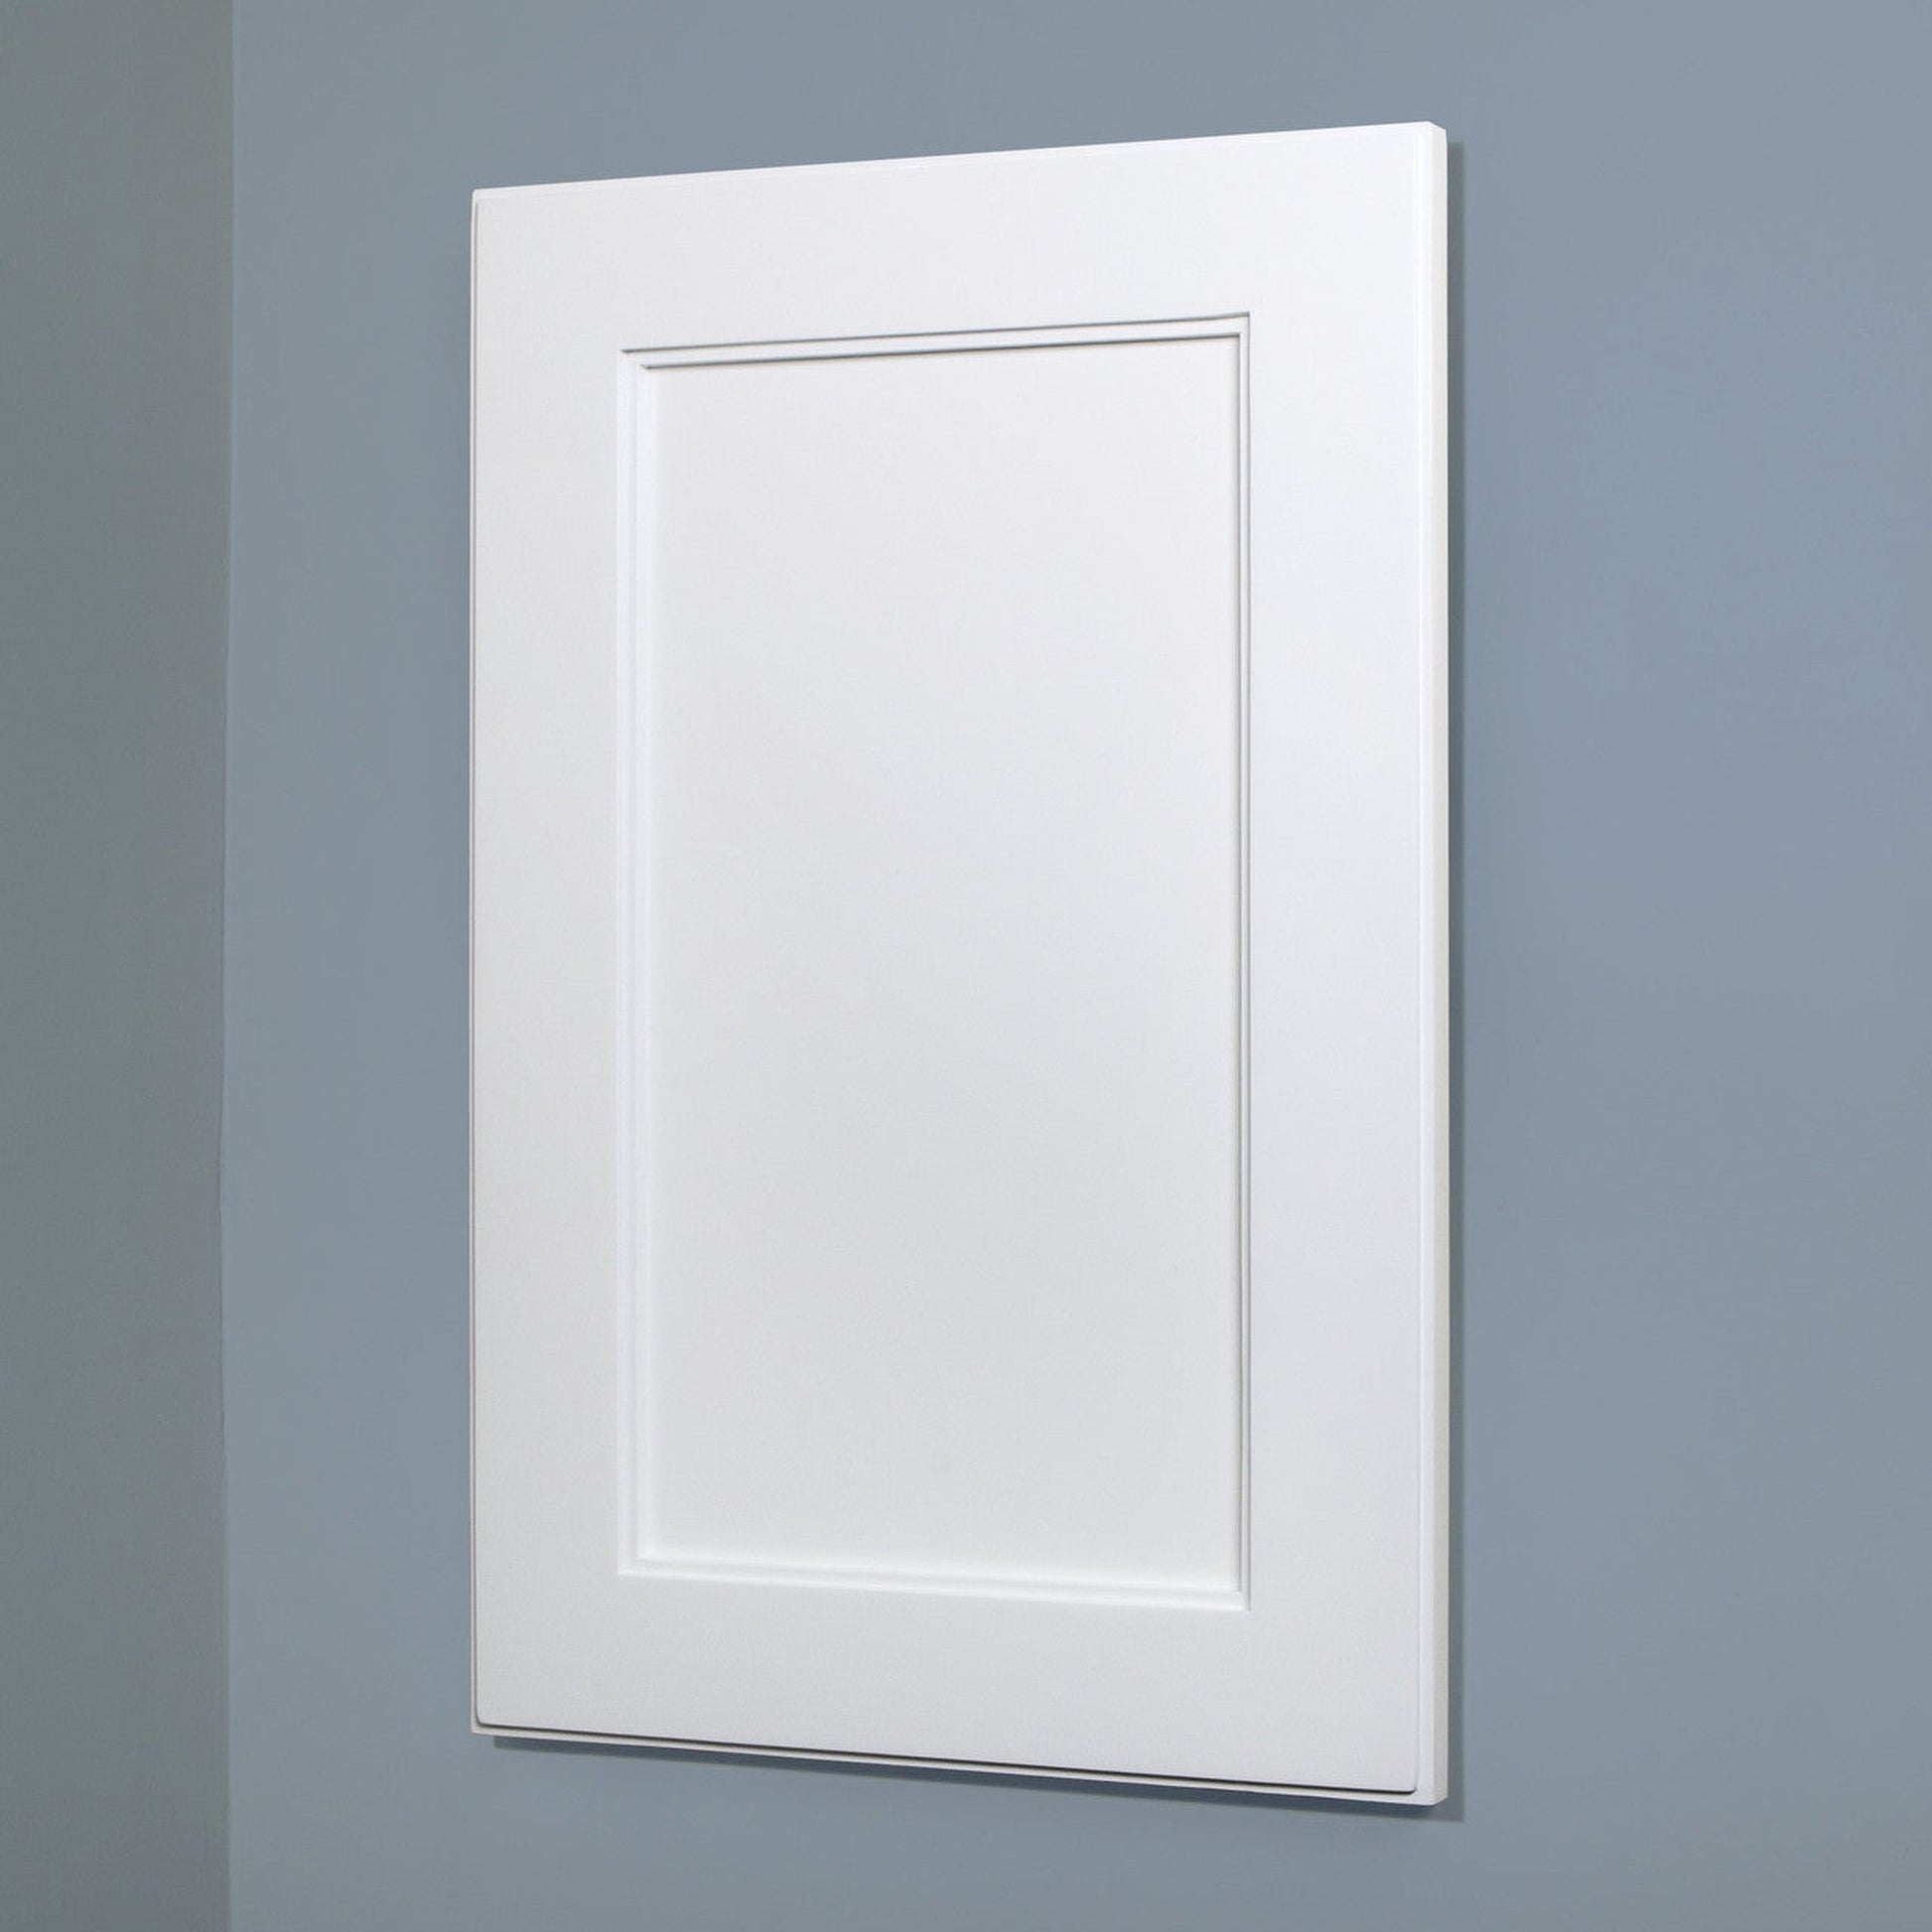 Fox Hollow Furnishings 101W5-CW 14" x 24" White Shaker Style White Interior Special 6" Depth Recessed Medicine Cabinet